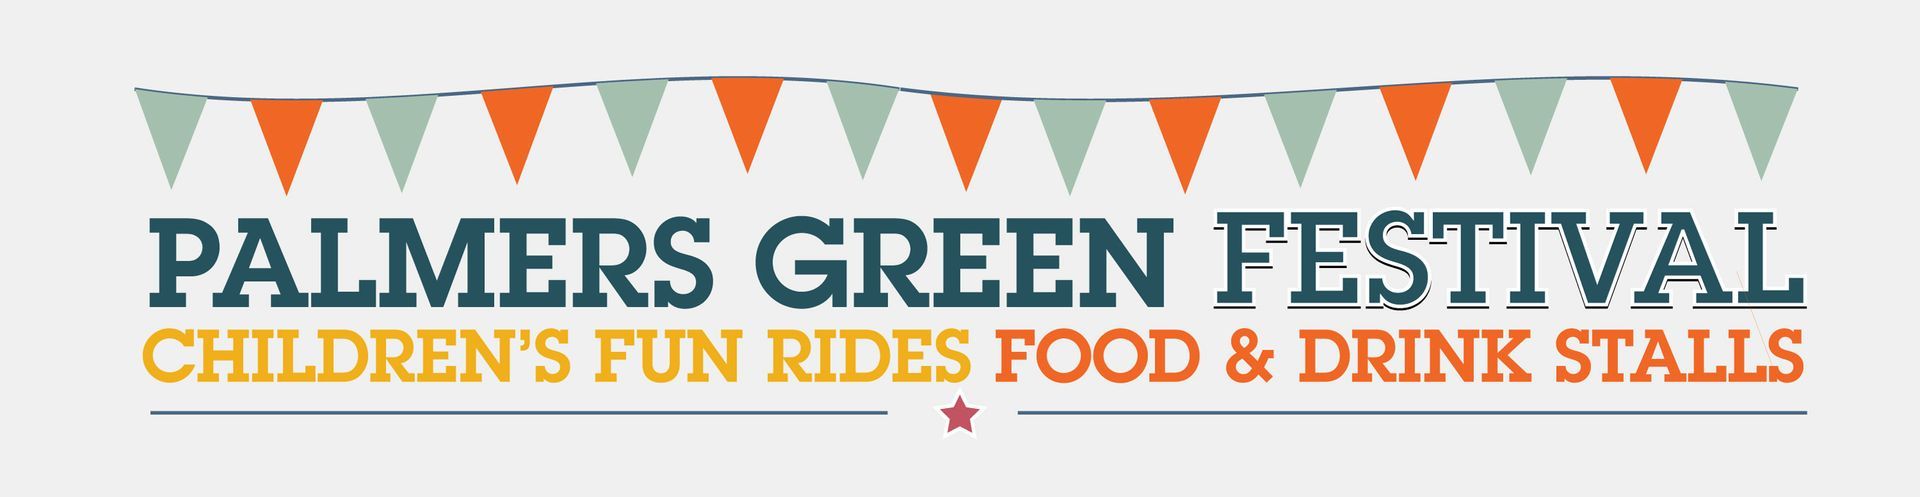 A logo for palmers green festival children 's fun rides food and drink stalls